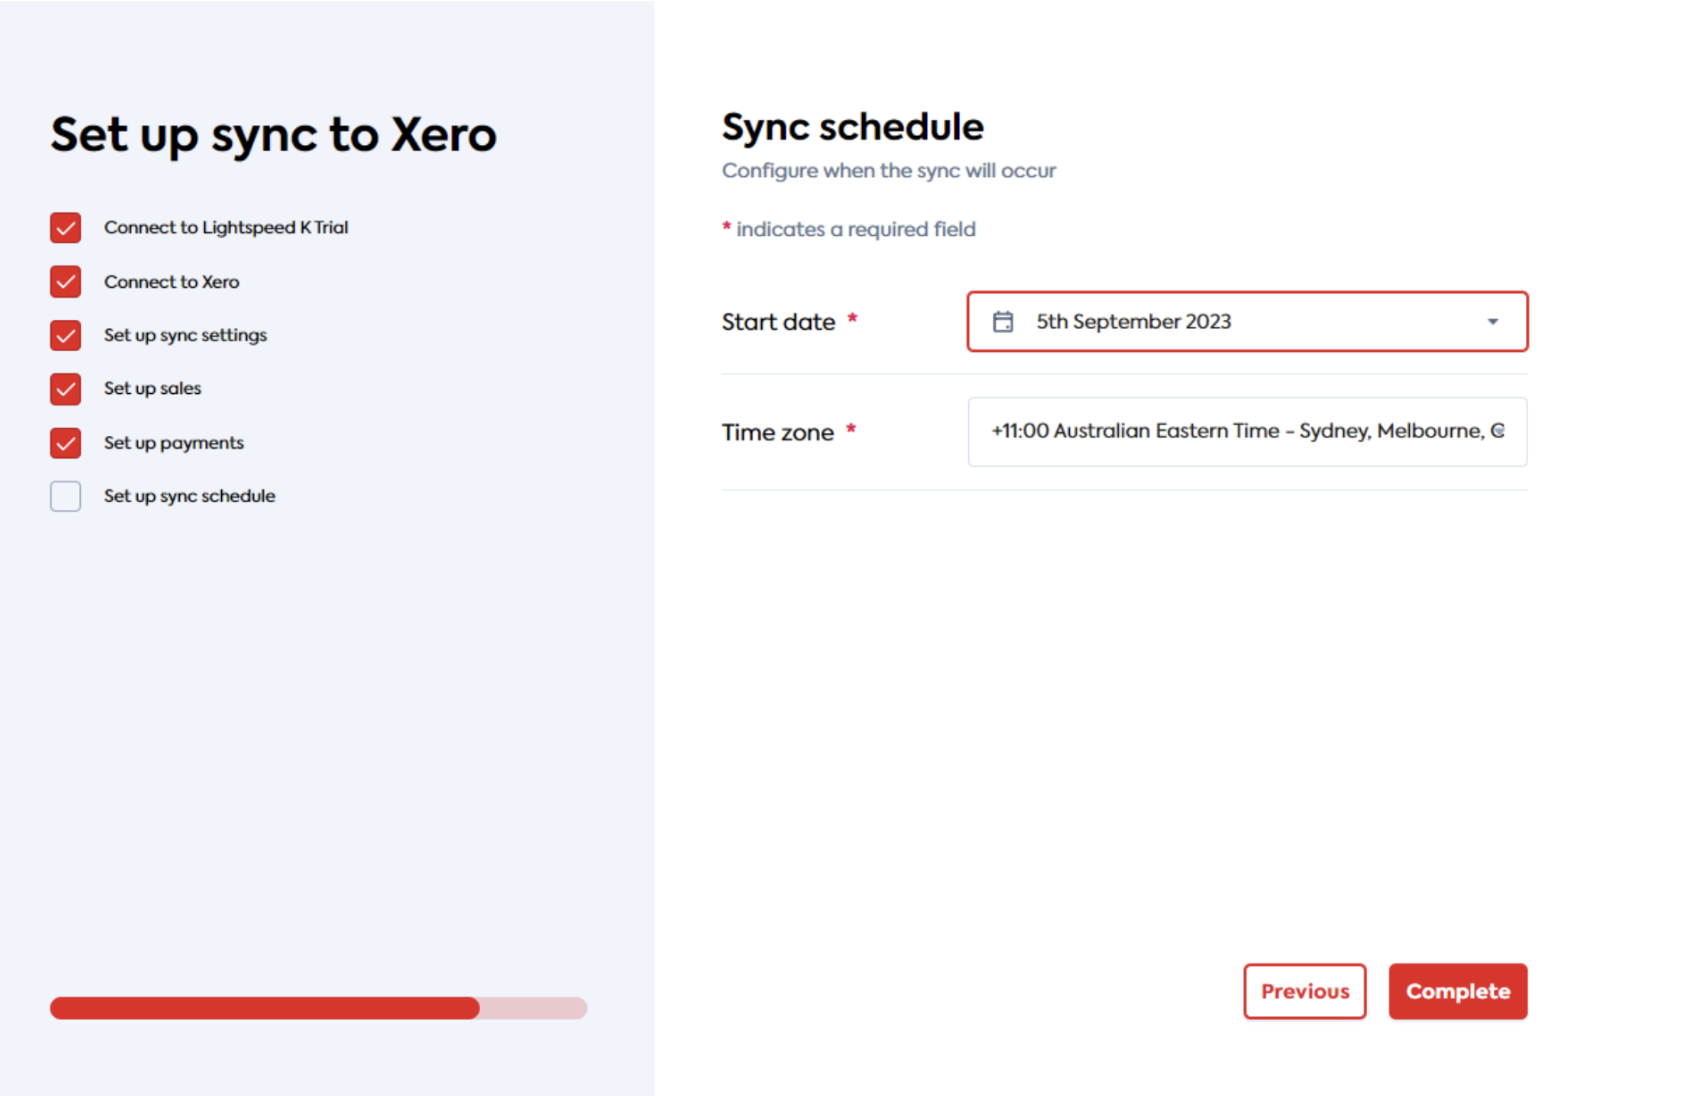 Sync schedule page with drop-down menu for start date and time zone